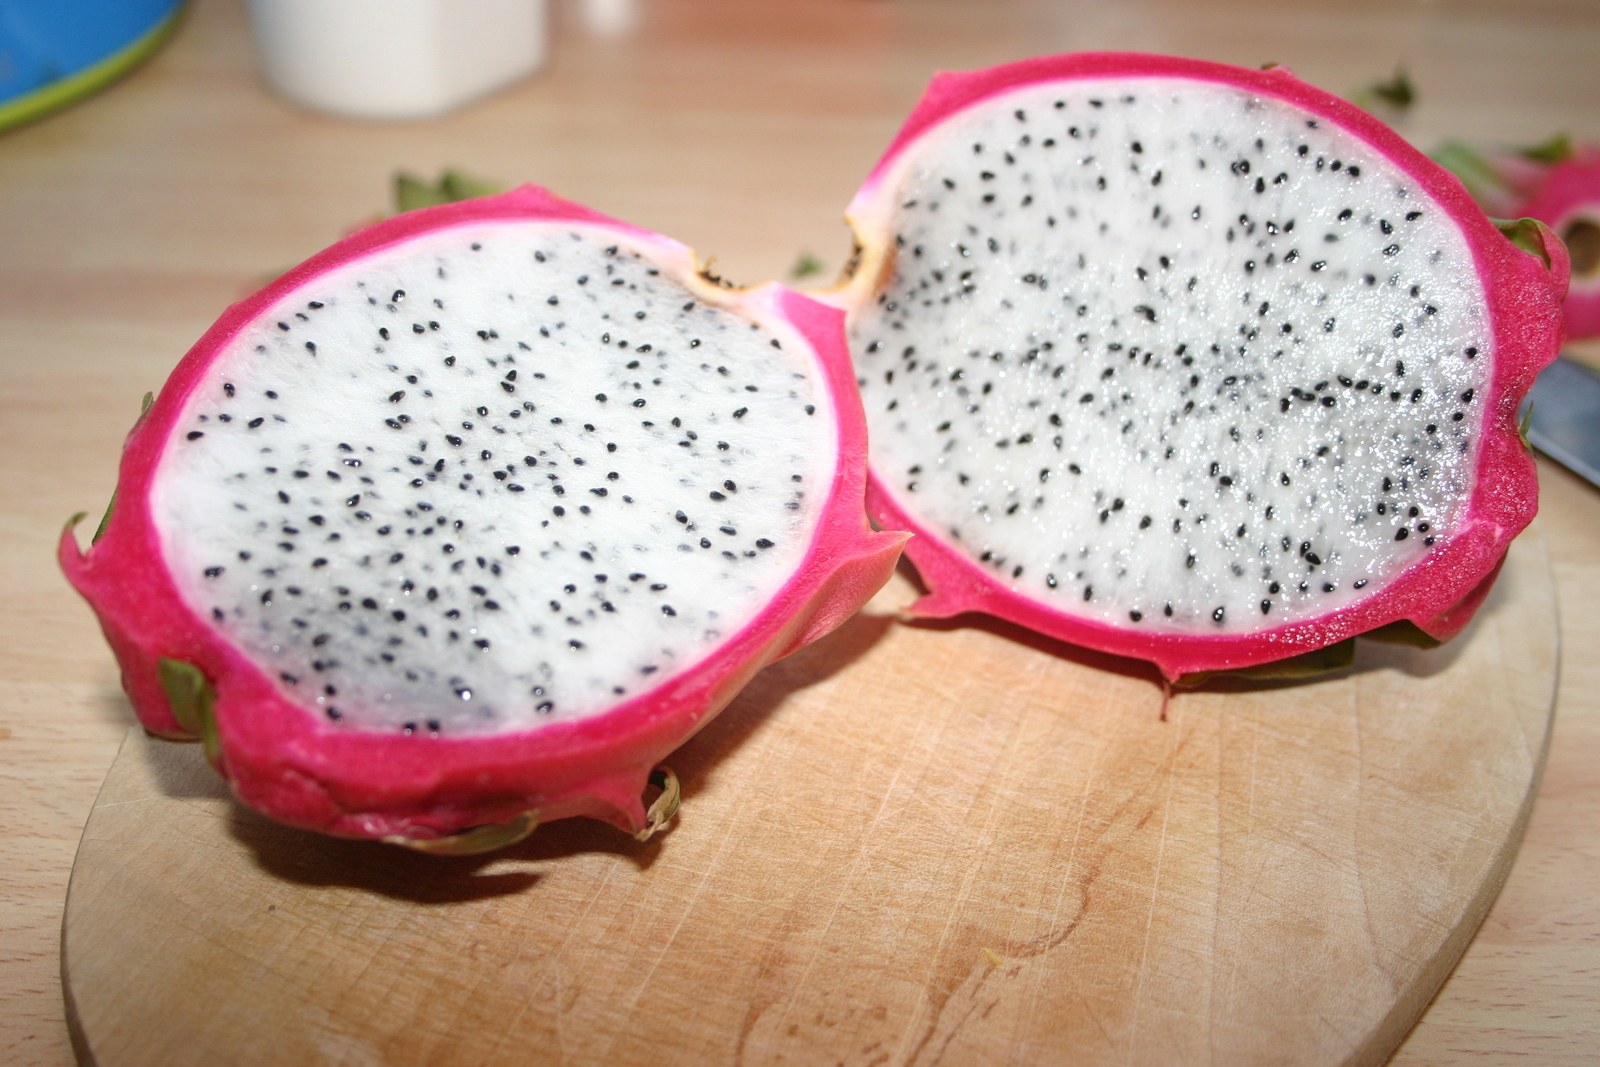 Try an unusual fruit, such as dragon fruit. It’s bright pink with green spines on the outside and white with tiny black seeds inside. (Photo courtesy of Morguefile)